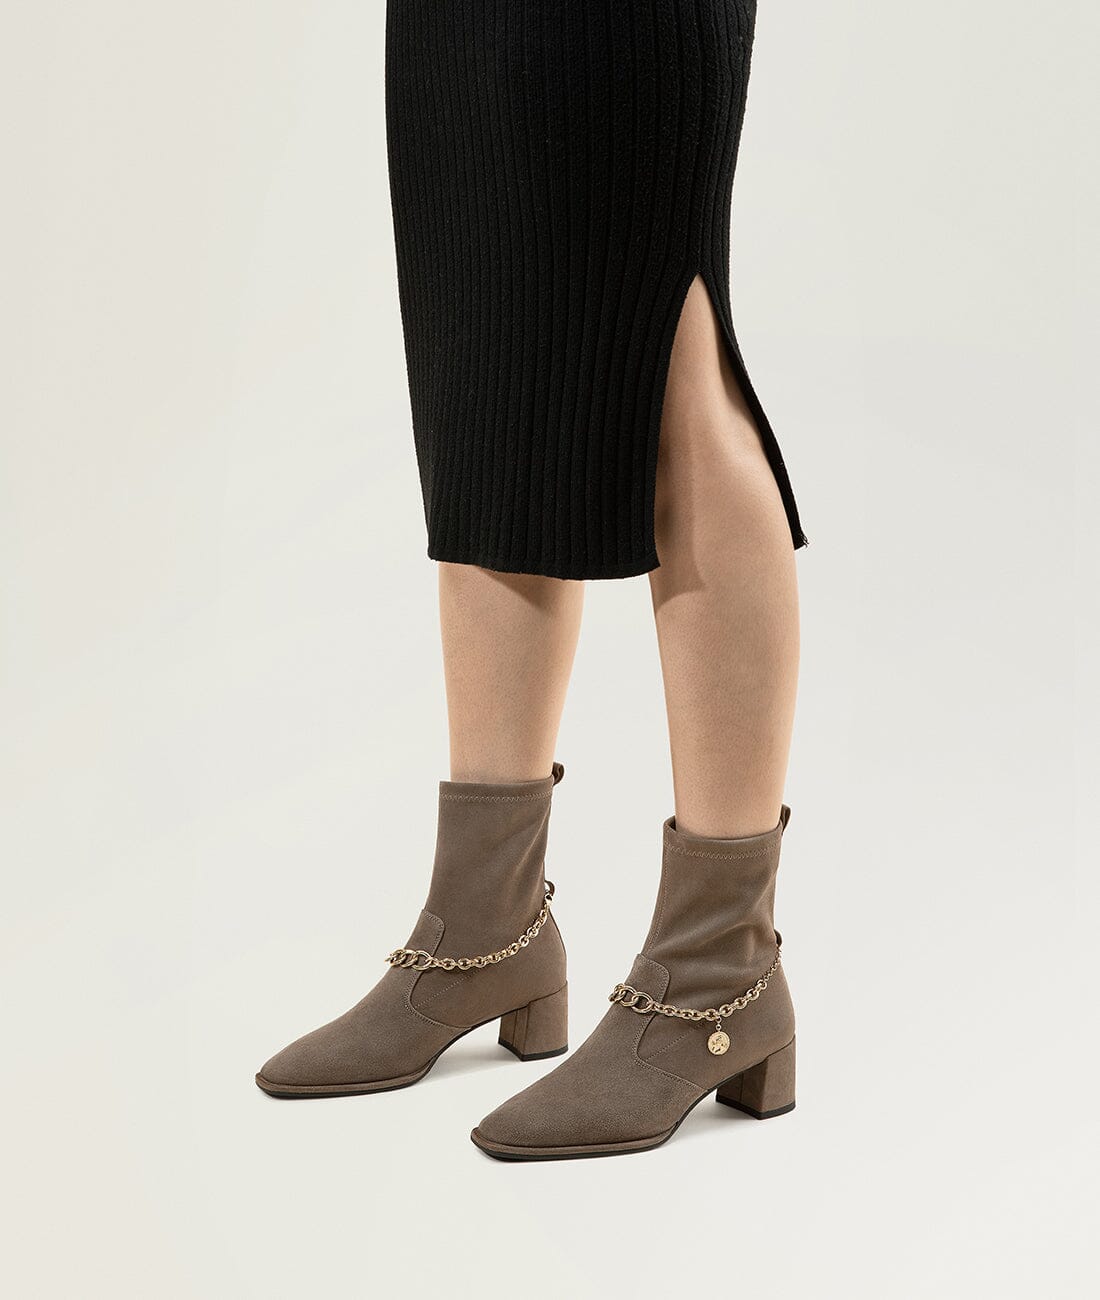 Oatmeal ankle heeled boots